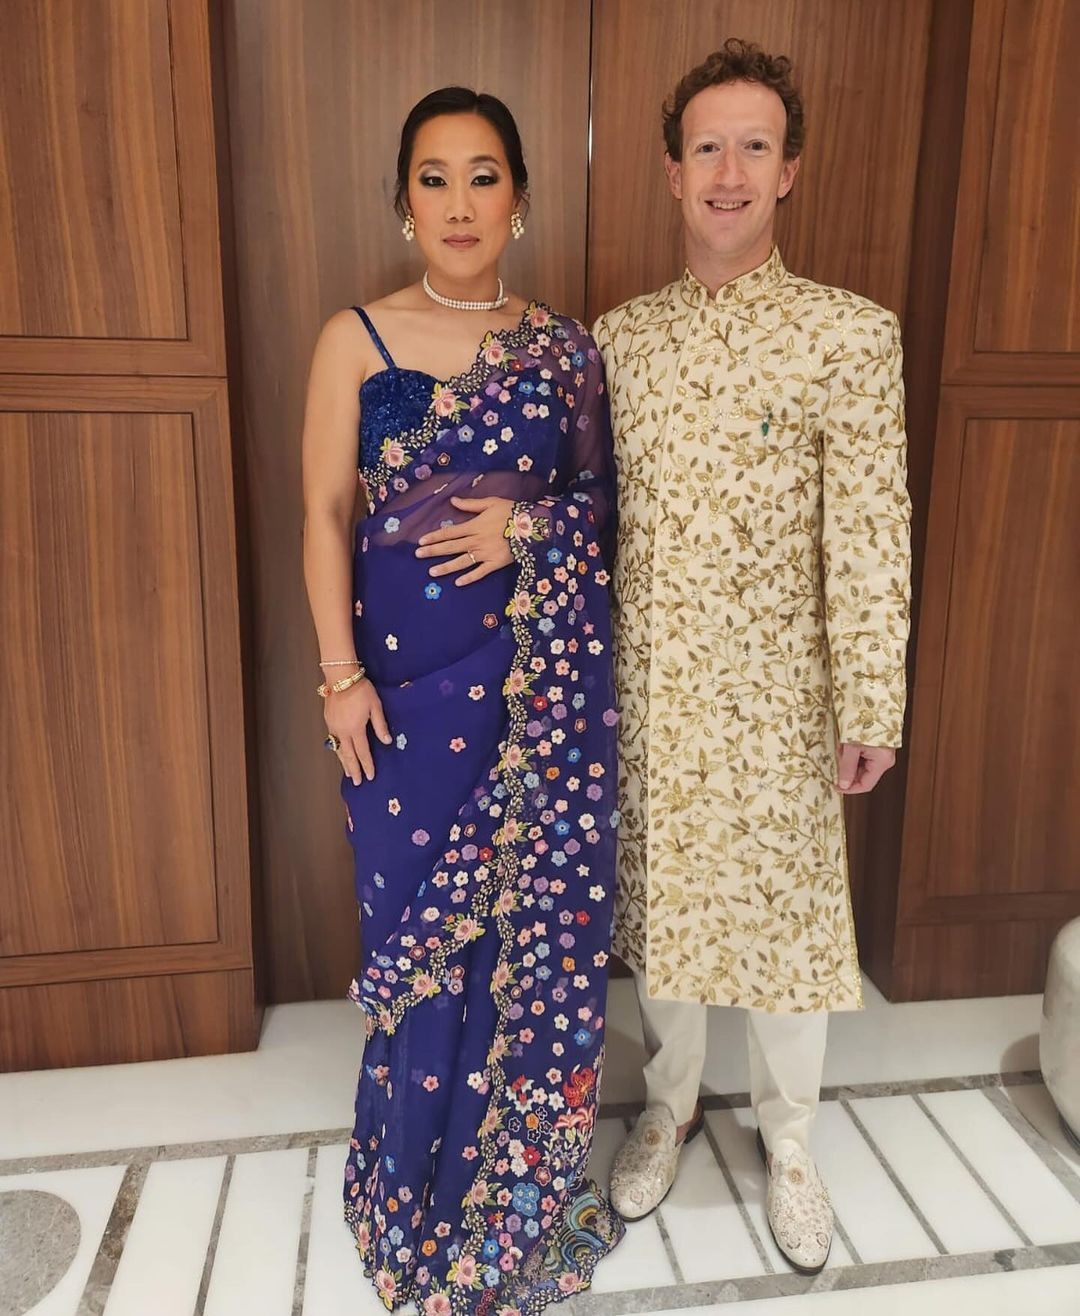 Facebook boss Mark Zuckerberg and his wife attract attention at a $120 million wedding party - Photo 6.